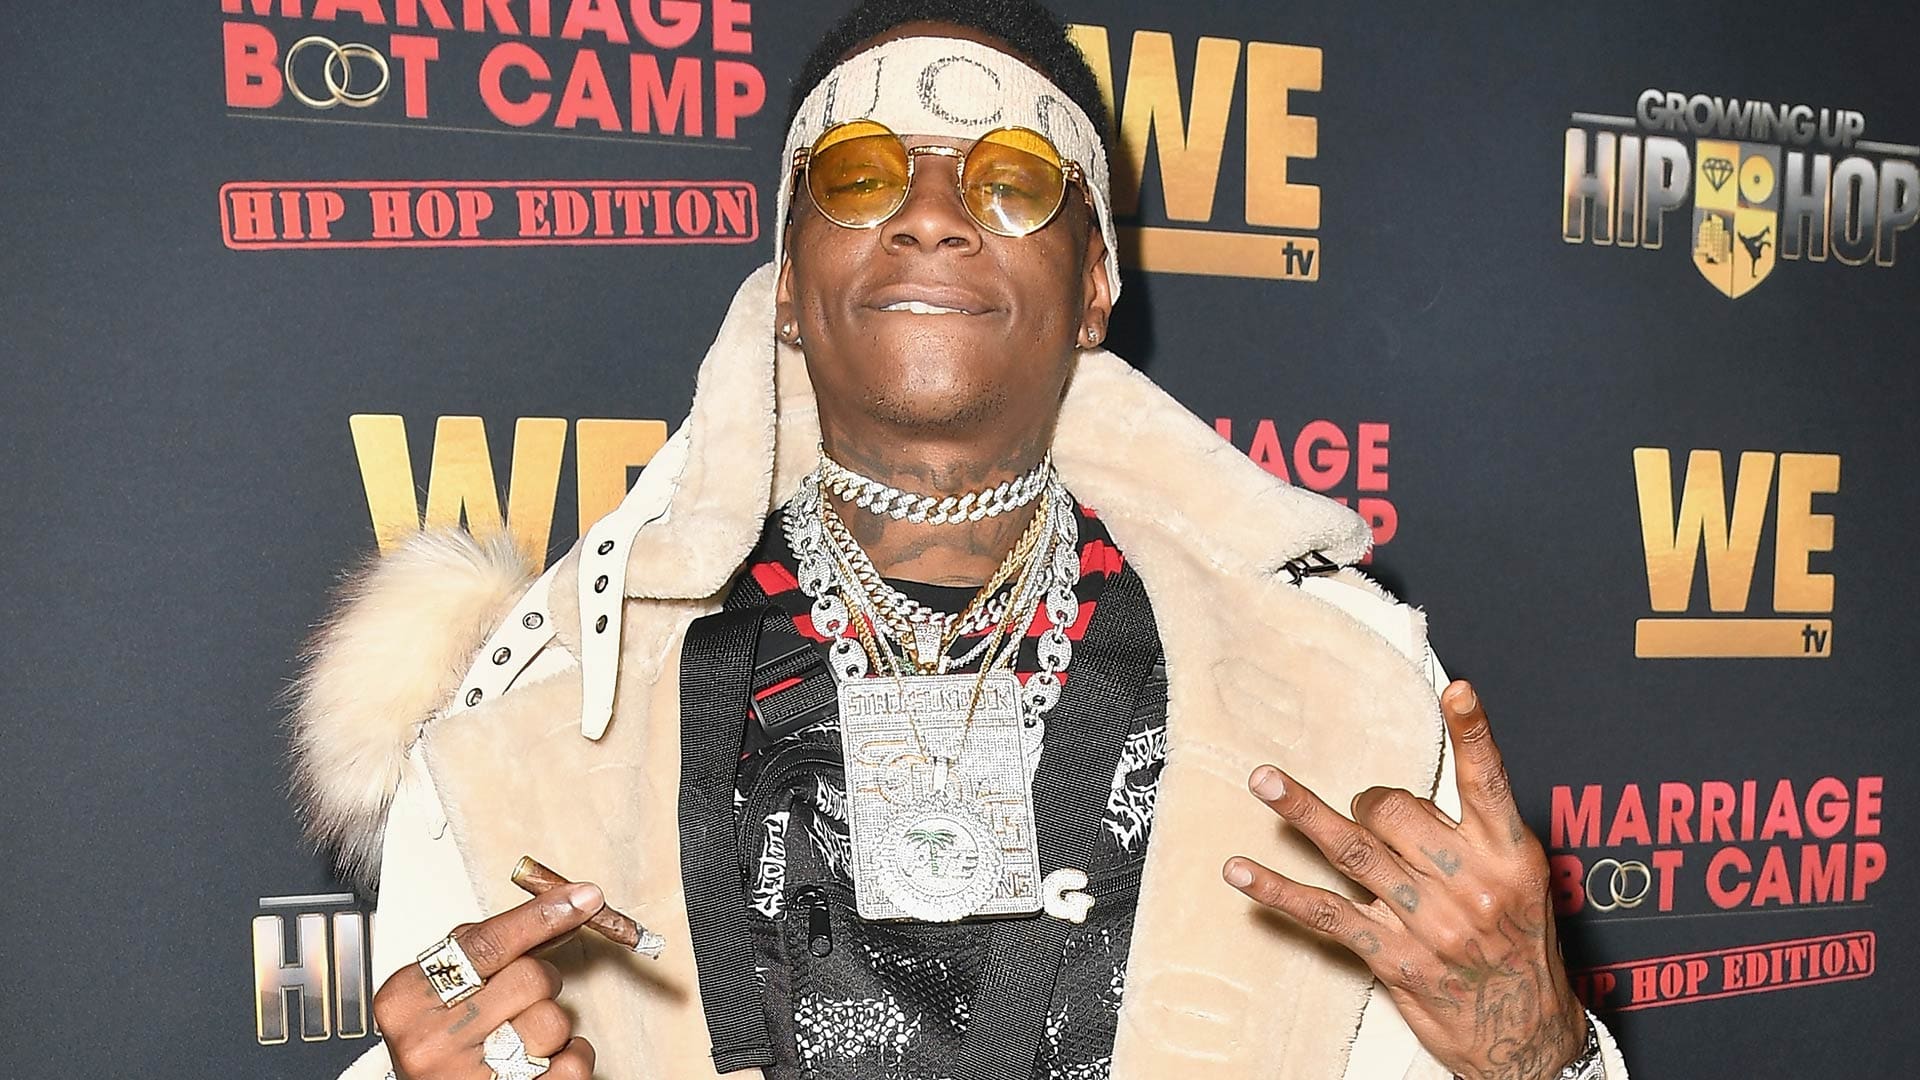 Soulja Boy Reportedly Believes That The Burglary At His House Was 'An Inside Job'